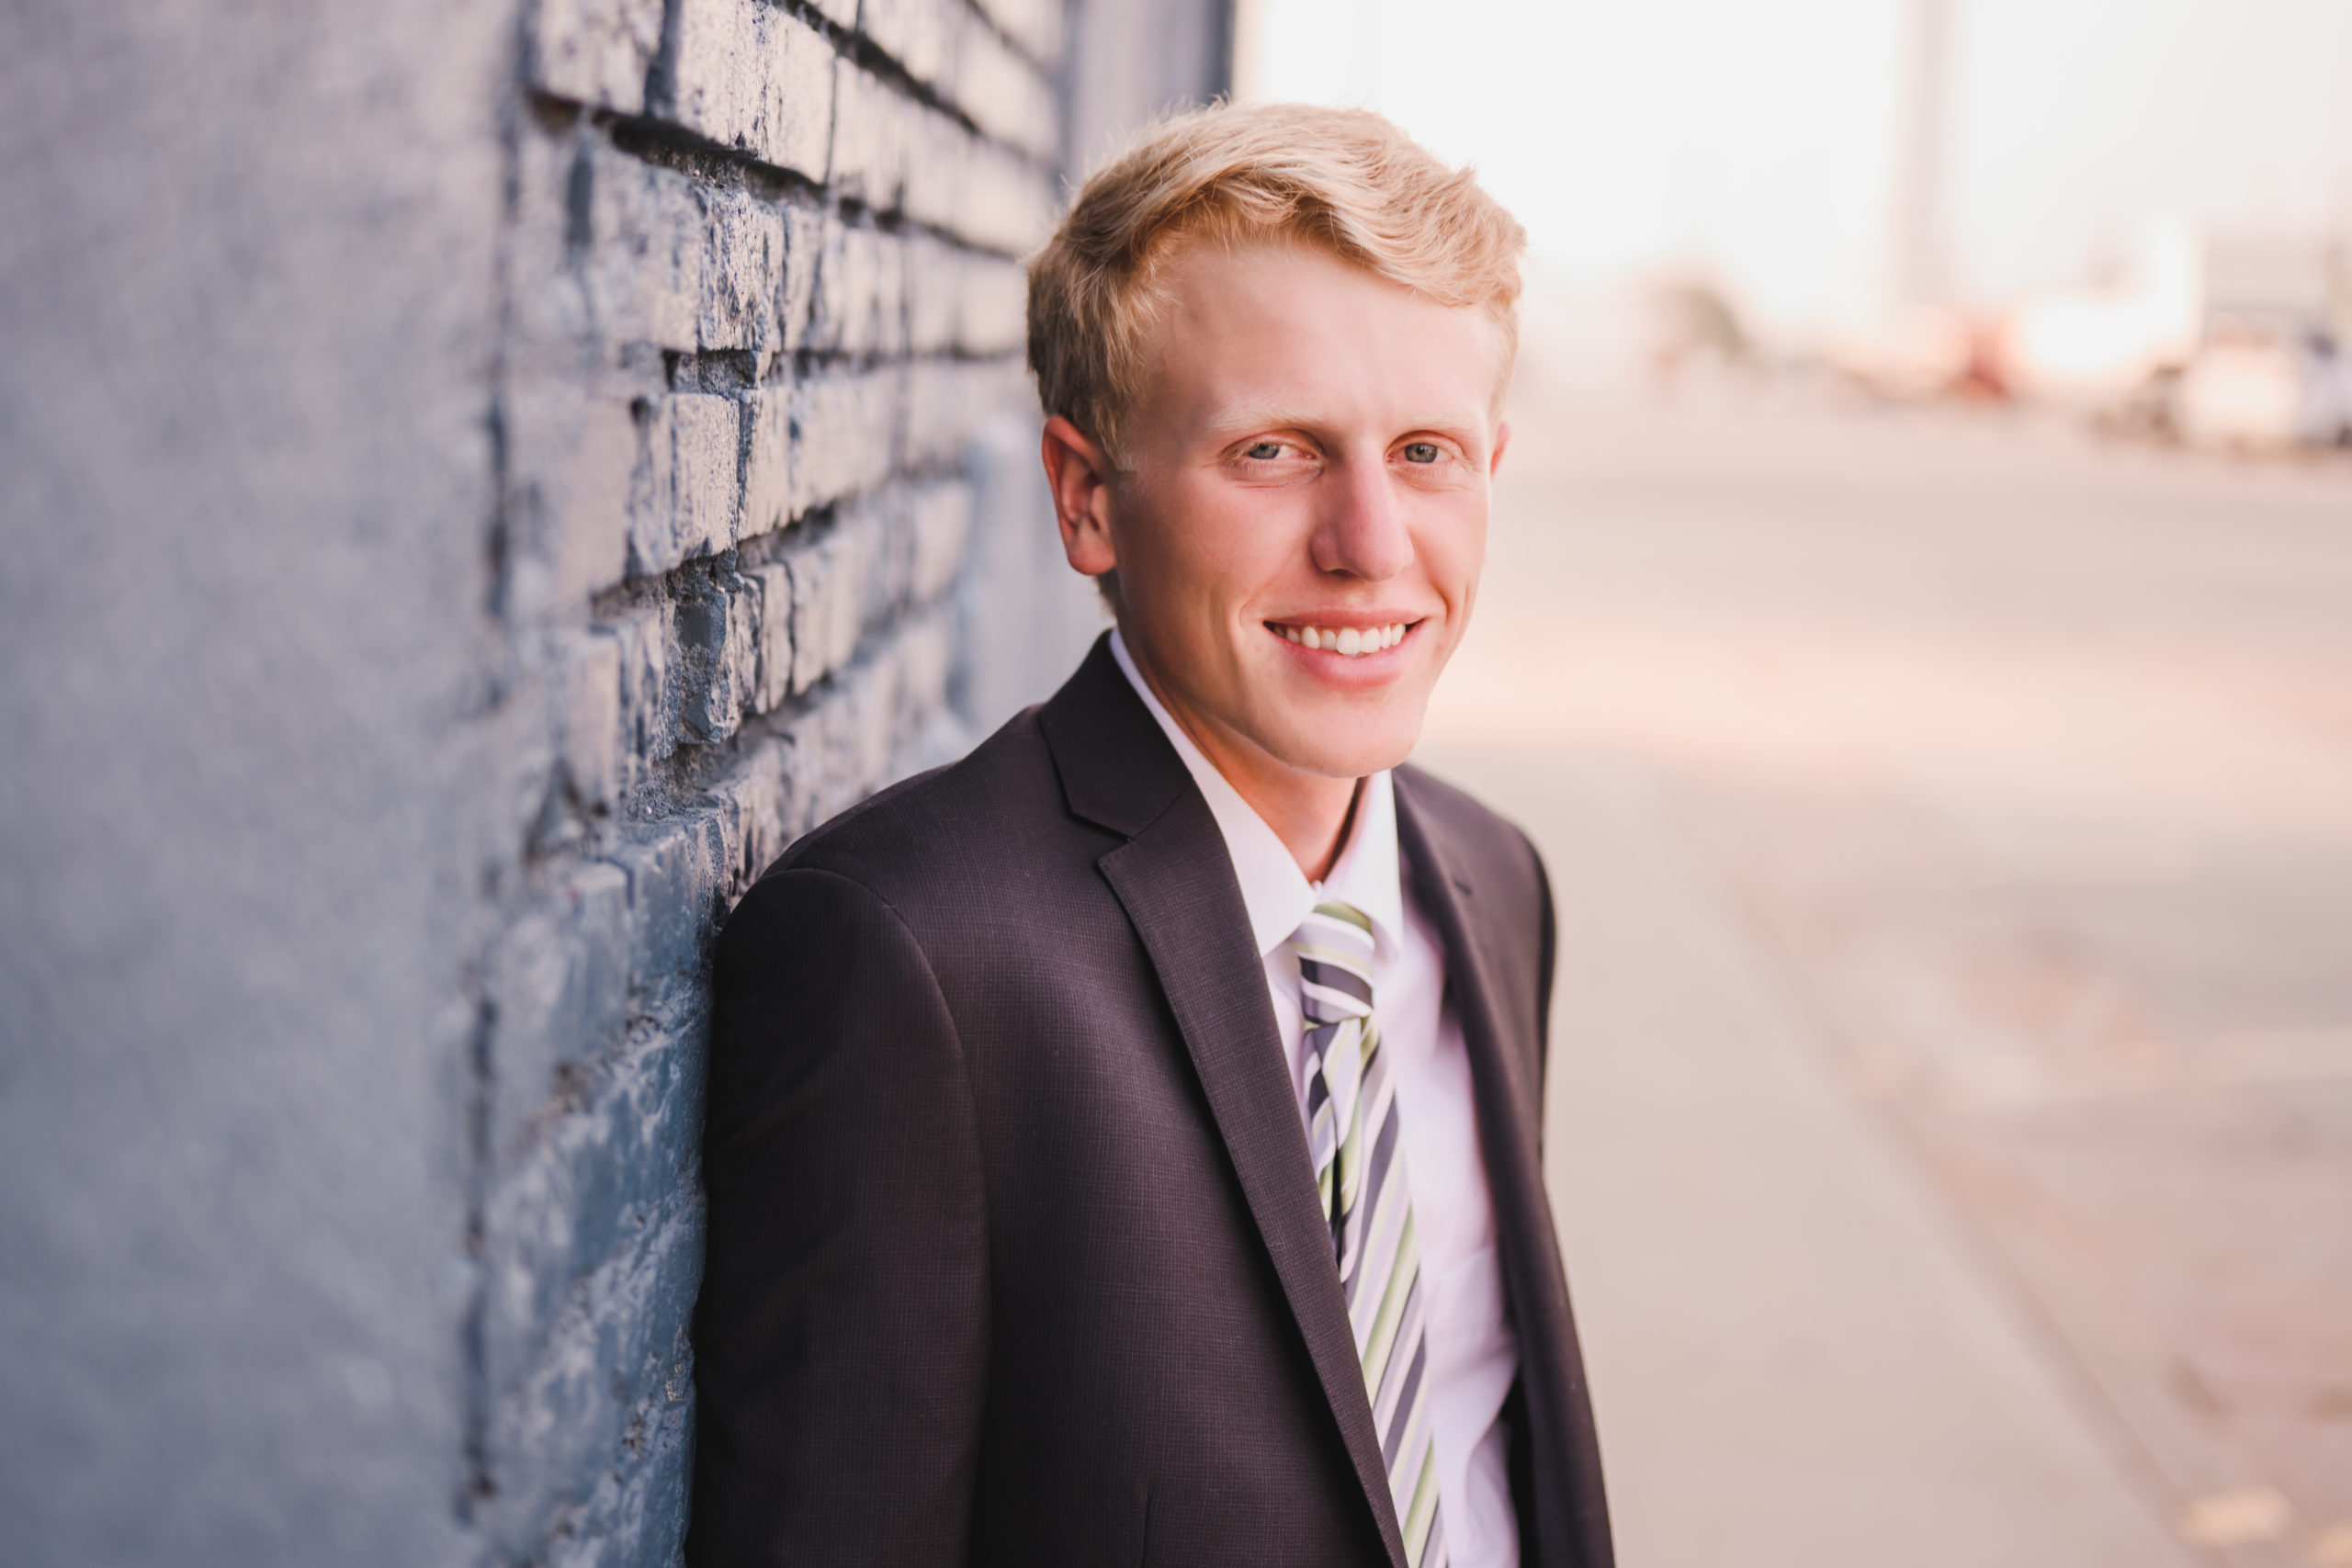 graduation photo of young man in suit and tie leaning against a brick wall